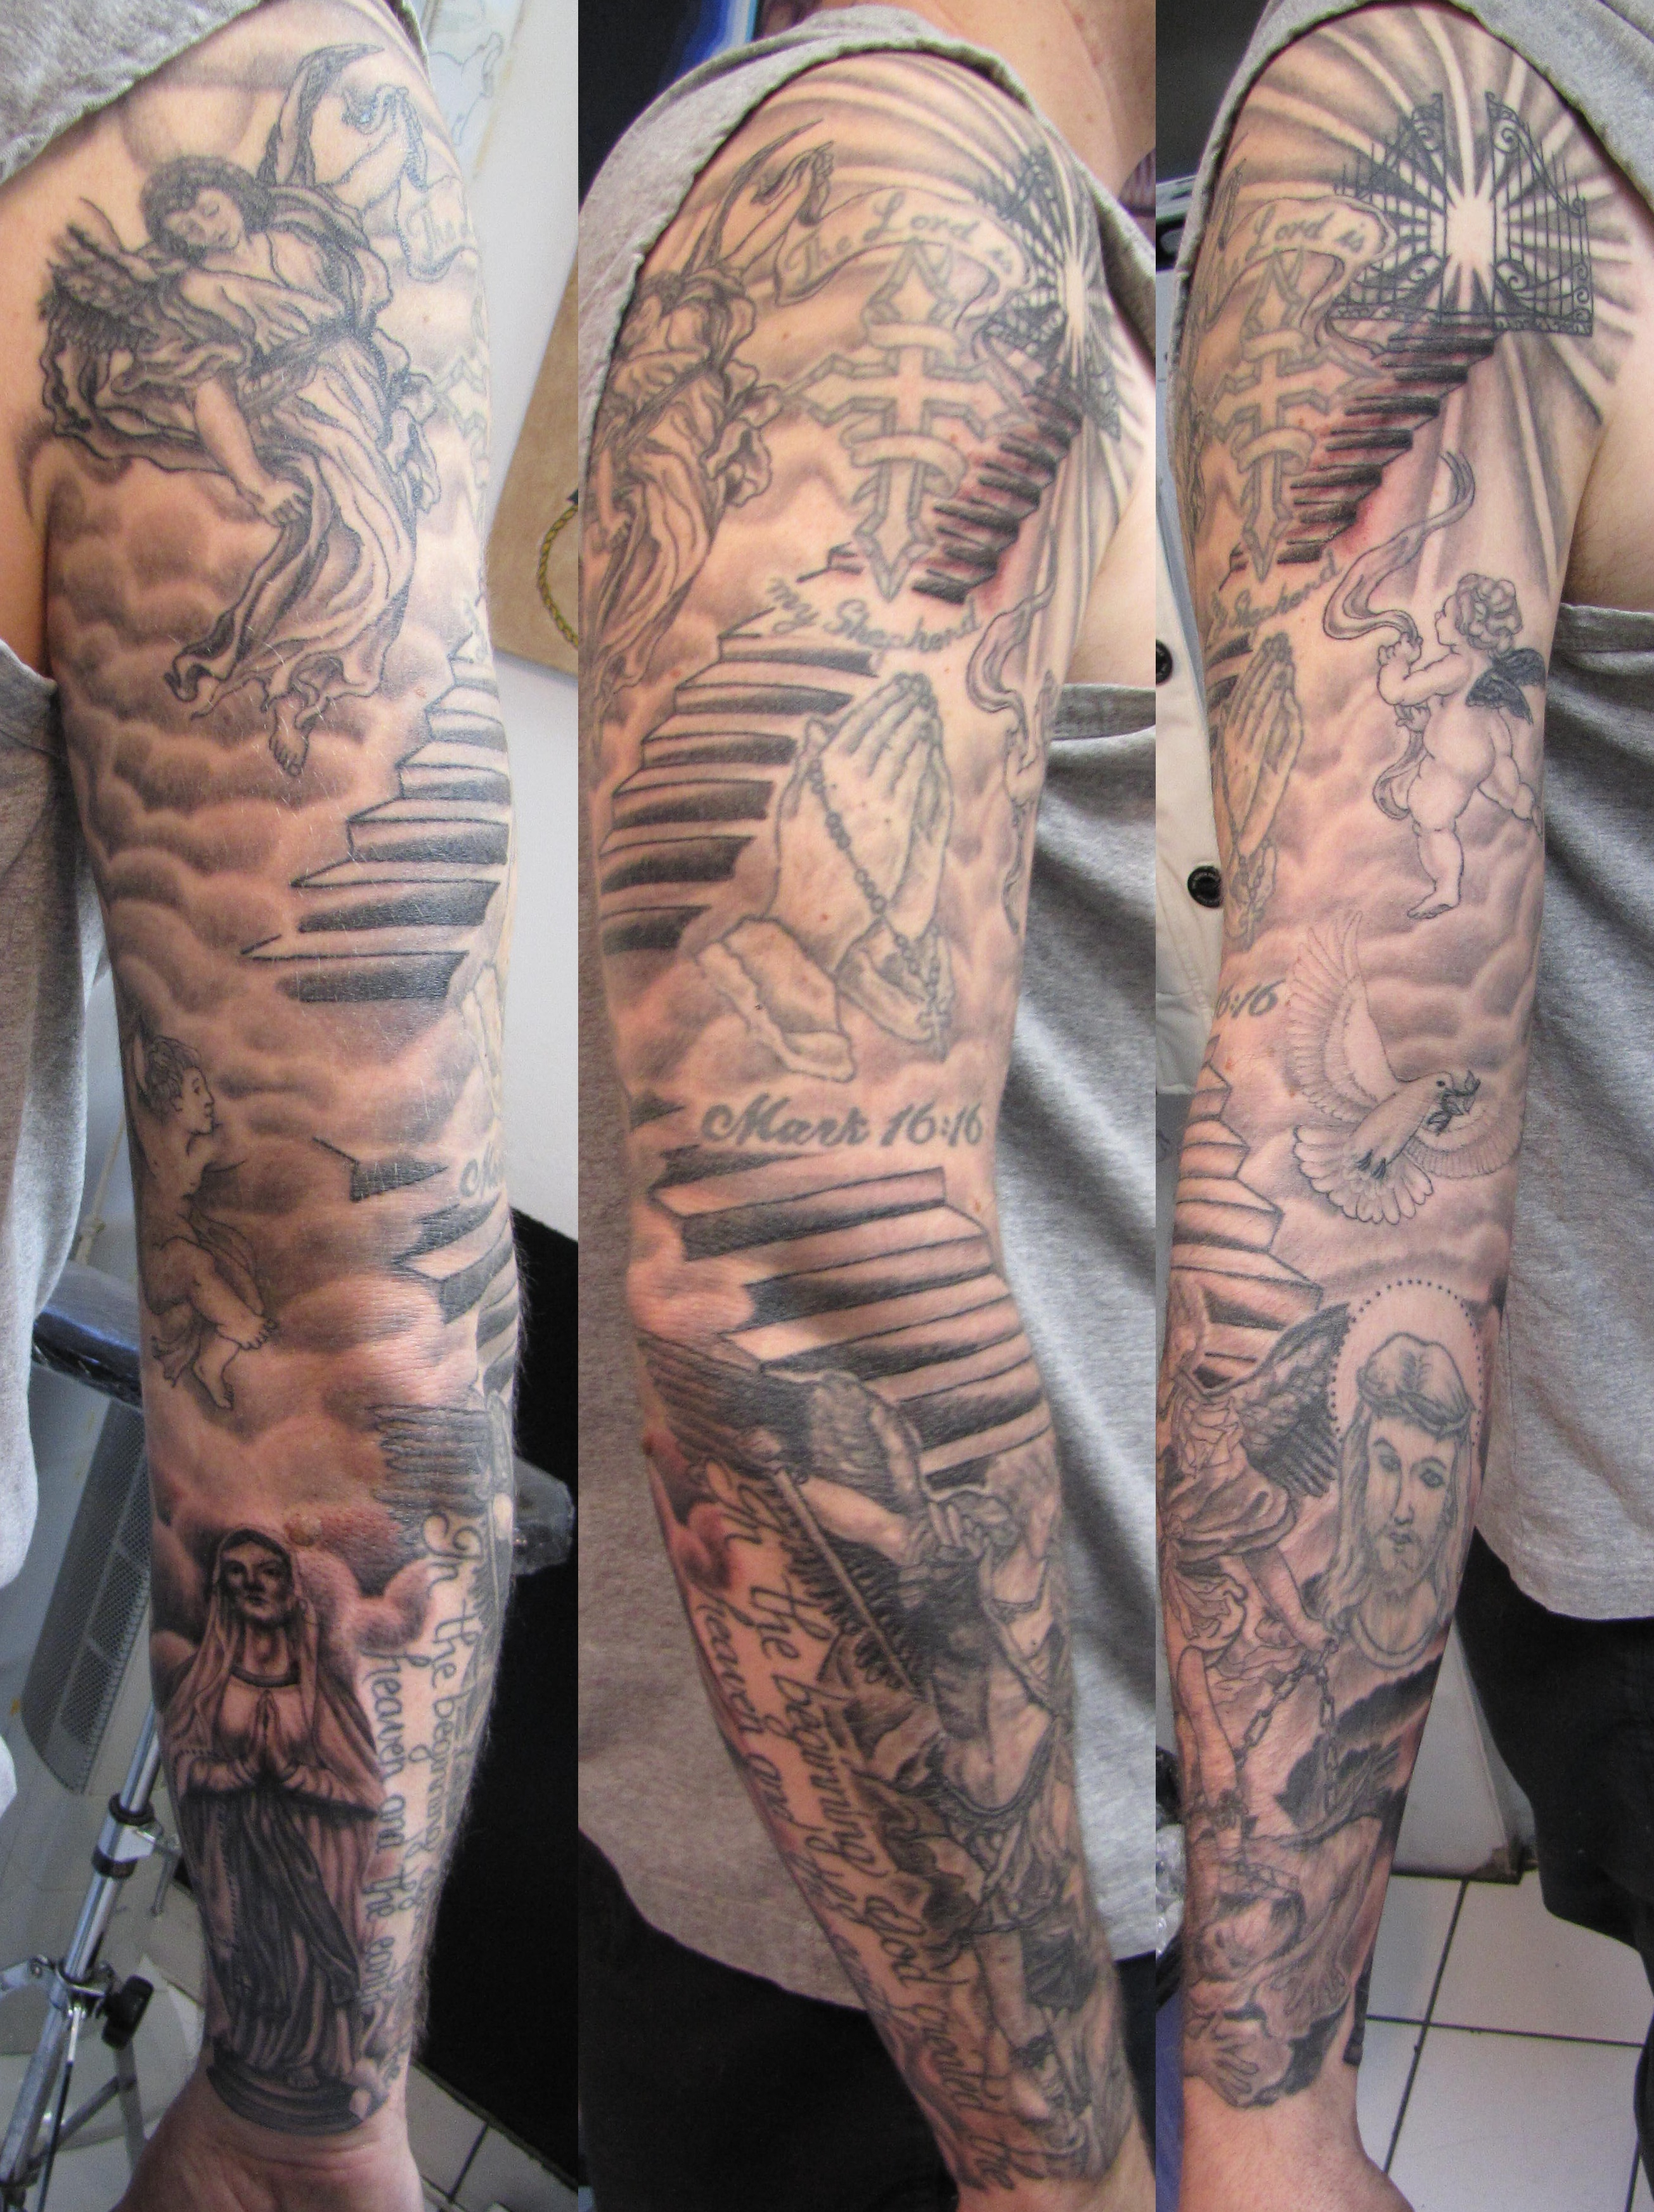 26 Angel Sleeve Tattoos Ideas with dimensions 2609 X 3489